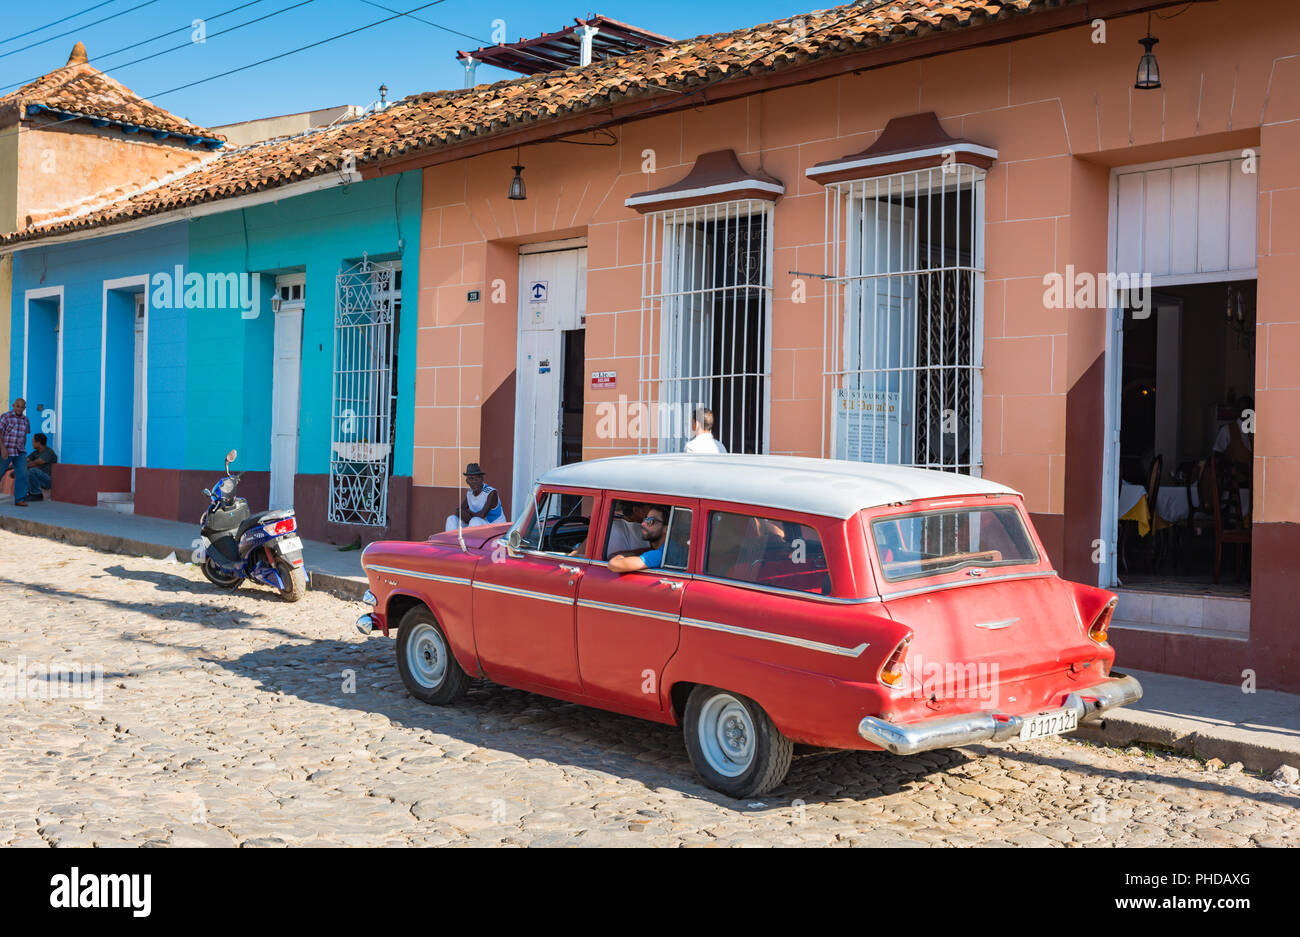 Trinidad, Cuba / March 15, 2016: Bright red vintage station wagon parked on cobble street of UNESCO World Heritage city Trinidad, Cuba. Stock Photo